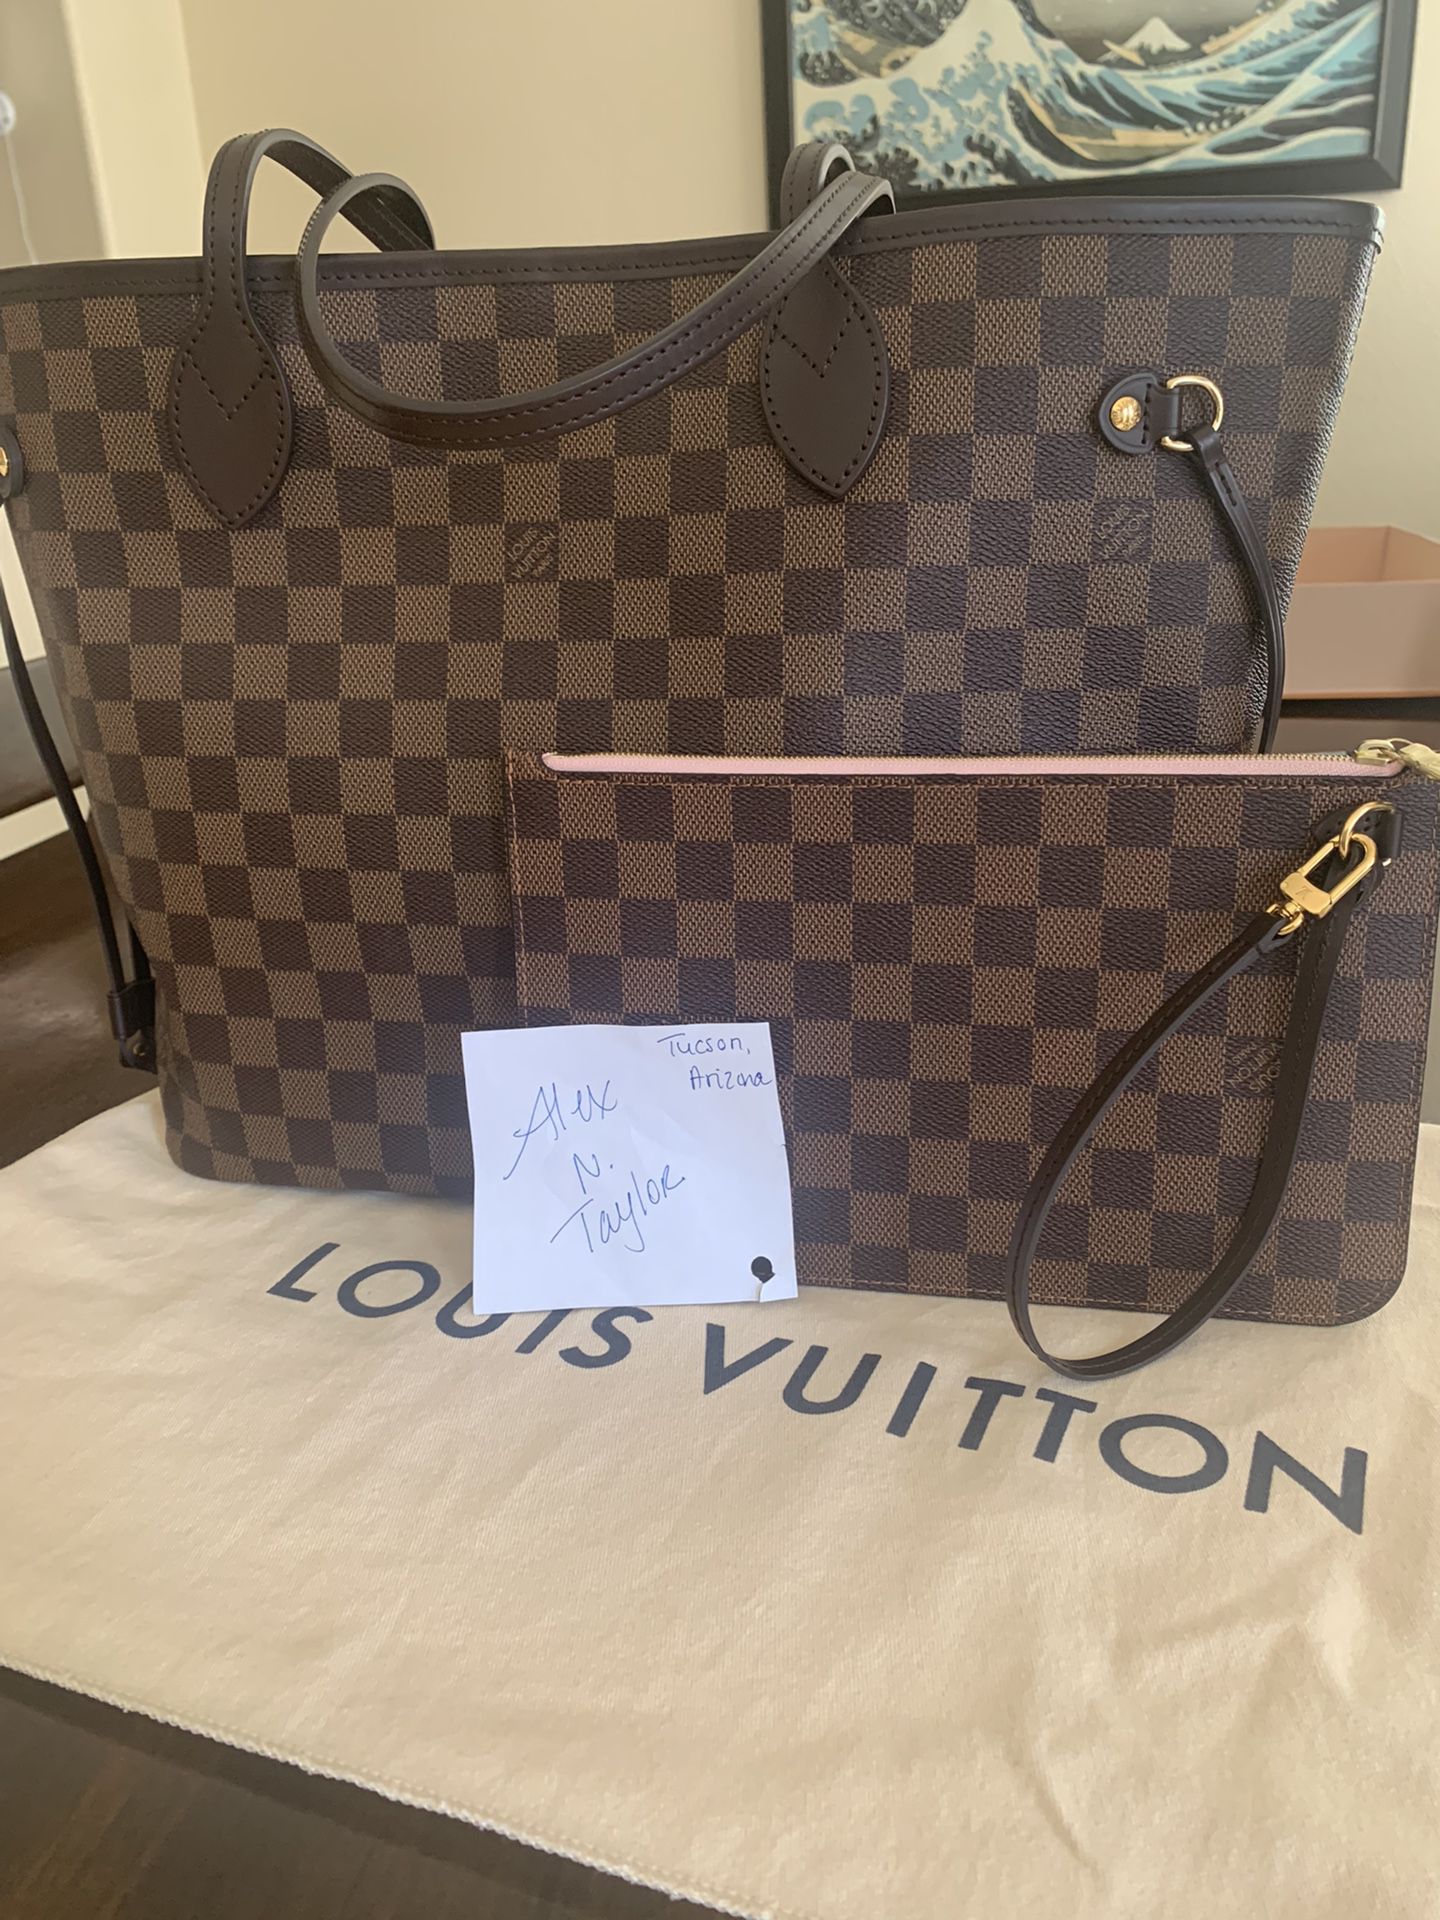 Authentic Louis Vuitton Neverfull for Sale in Tucson, AZ - OfferUp